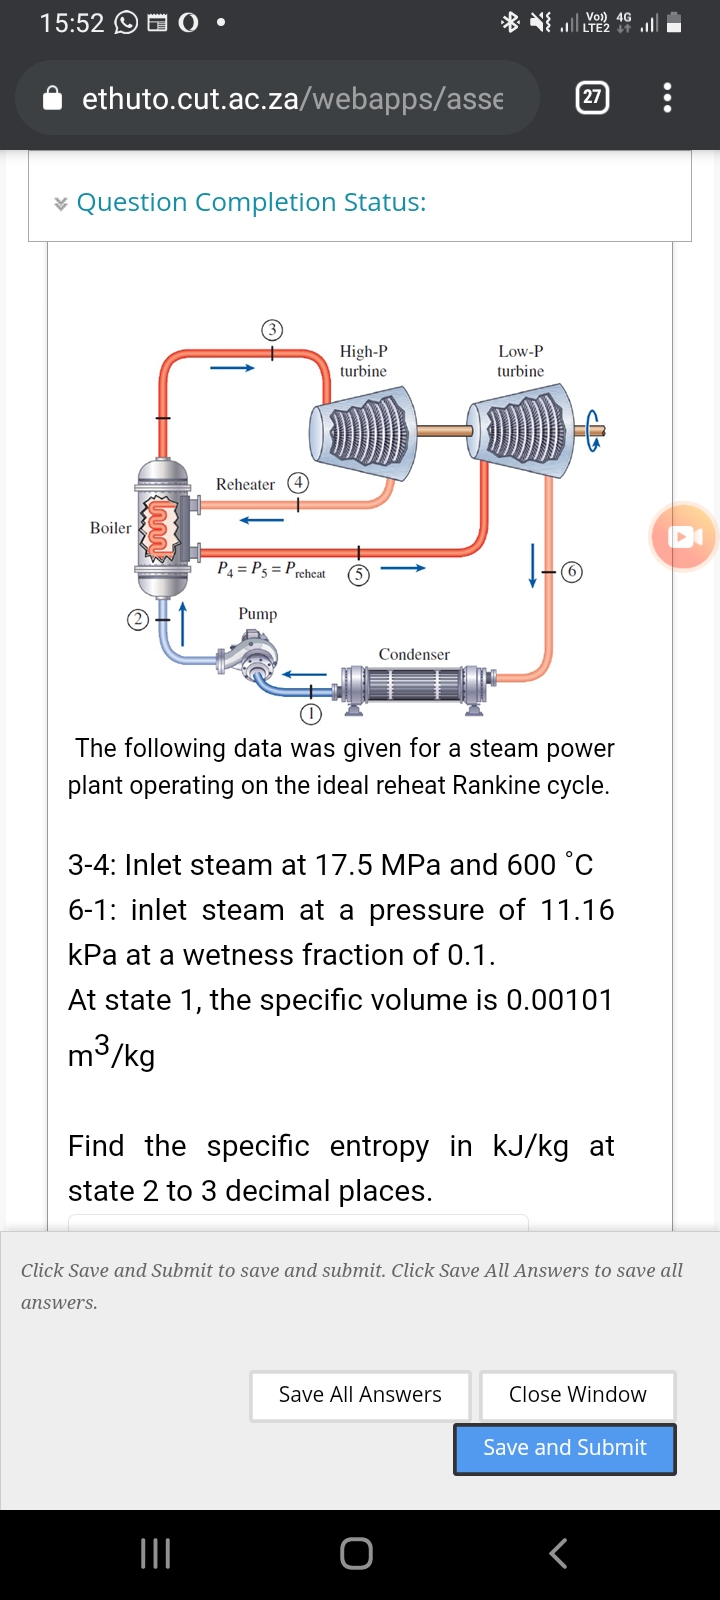 15:52 O O O
LTE2
ethuto.cut.ac.za/webapps/asse
27
* Question Completion Status:
High-P
turbine
Low-P
turbine
Reheater (4)
Boiler
P4 = P5 = Prcheat
Pump
Condenser
The following data was given for a steam power
plant operating on the ideal reheat Rankine cycle.
3-4: Inlet steam at 17.5 MPa and 600 °C
6-1: inlet steam at a pressure of 11.16
kPa at a wetness fraction of 0.1.
At state 1, the specific volume is 0.00101
m3/kg
Find the specific entropy in kJ/kg at
state 2 to 3 decimal places.
Click Save and Submit to save and submit. Click Save All Answers to save all
answers.
Save All Answers
Close Window
Save and Submit
II
O-
